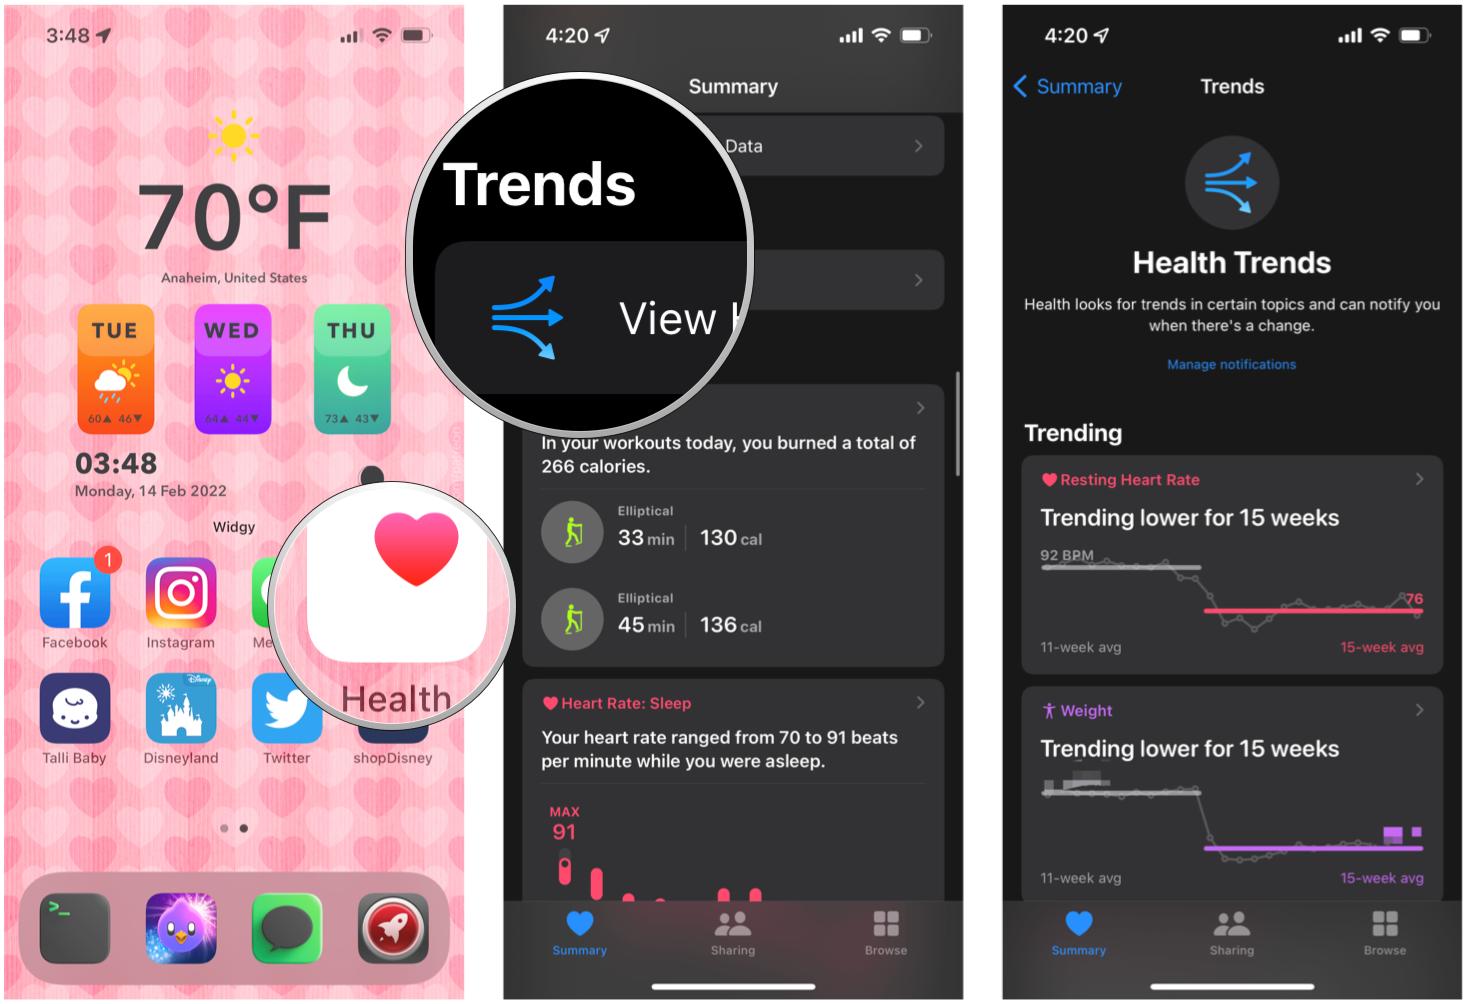 View Health Trends: Launch Health, scroll down and tap View Health Trends